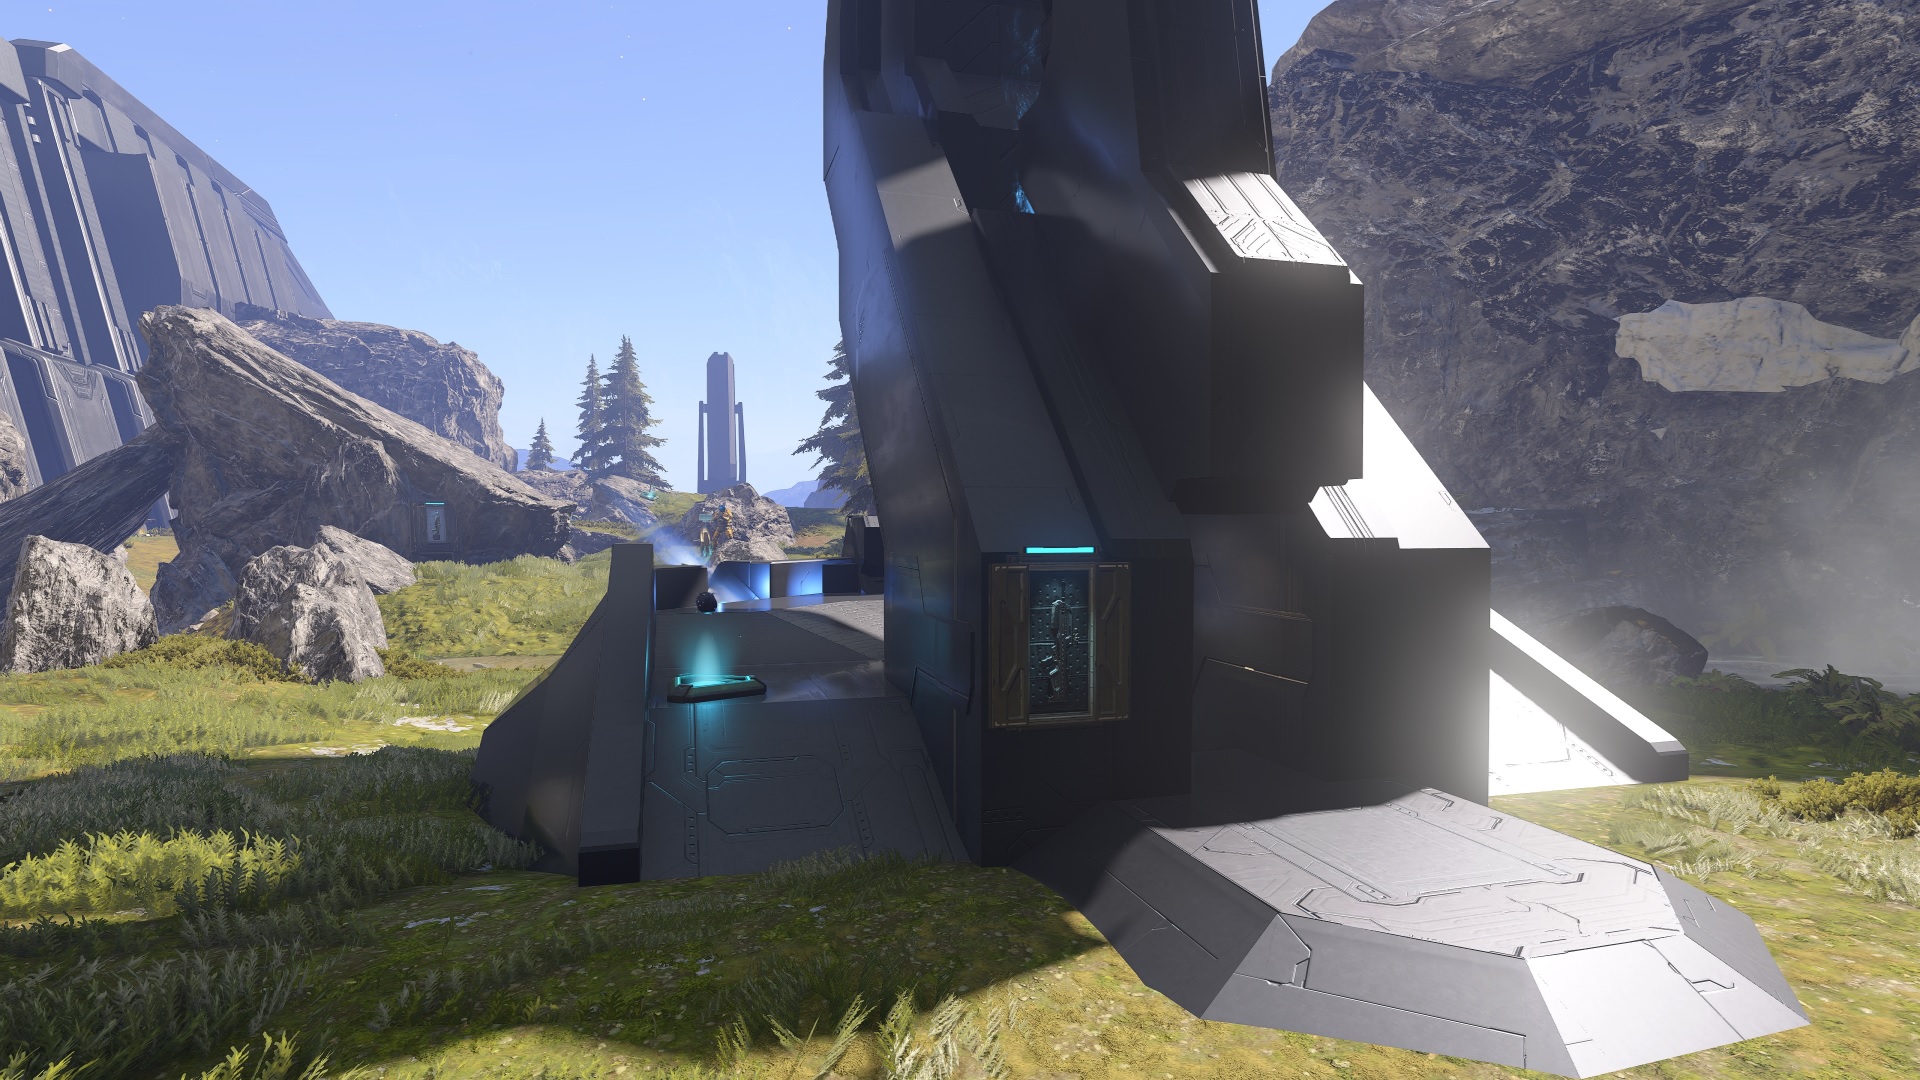 Halo Infinite screenshot of a smaller version of Valhalla from Halo 3 made in Forge